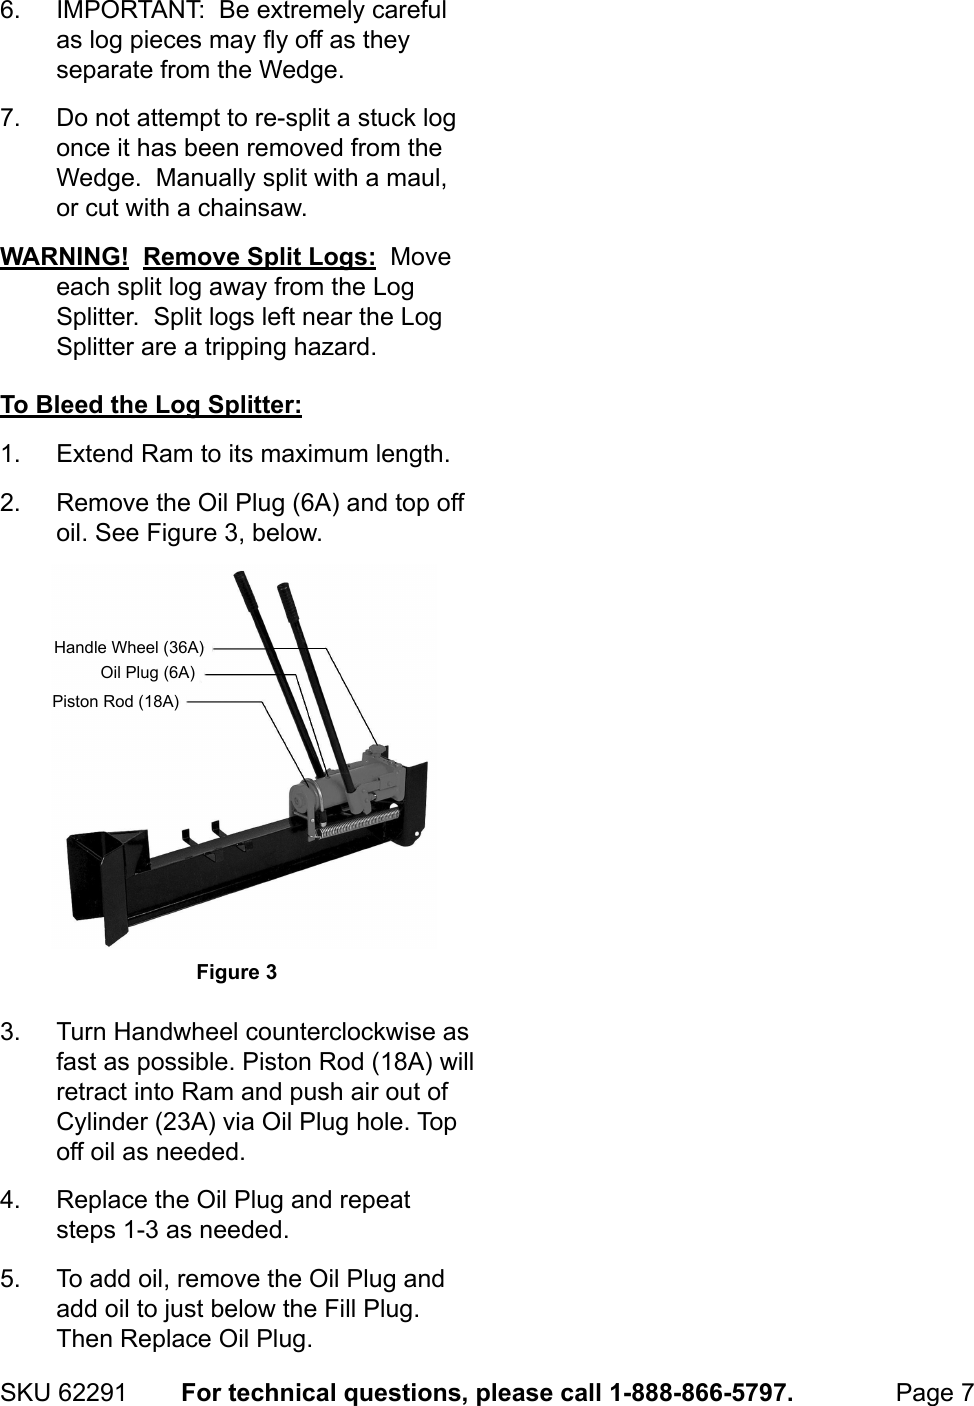 Page 7 of 12 - Manual For The 62291 10 Ton Hydraulic Log Splitter